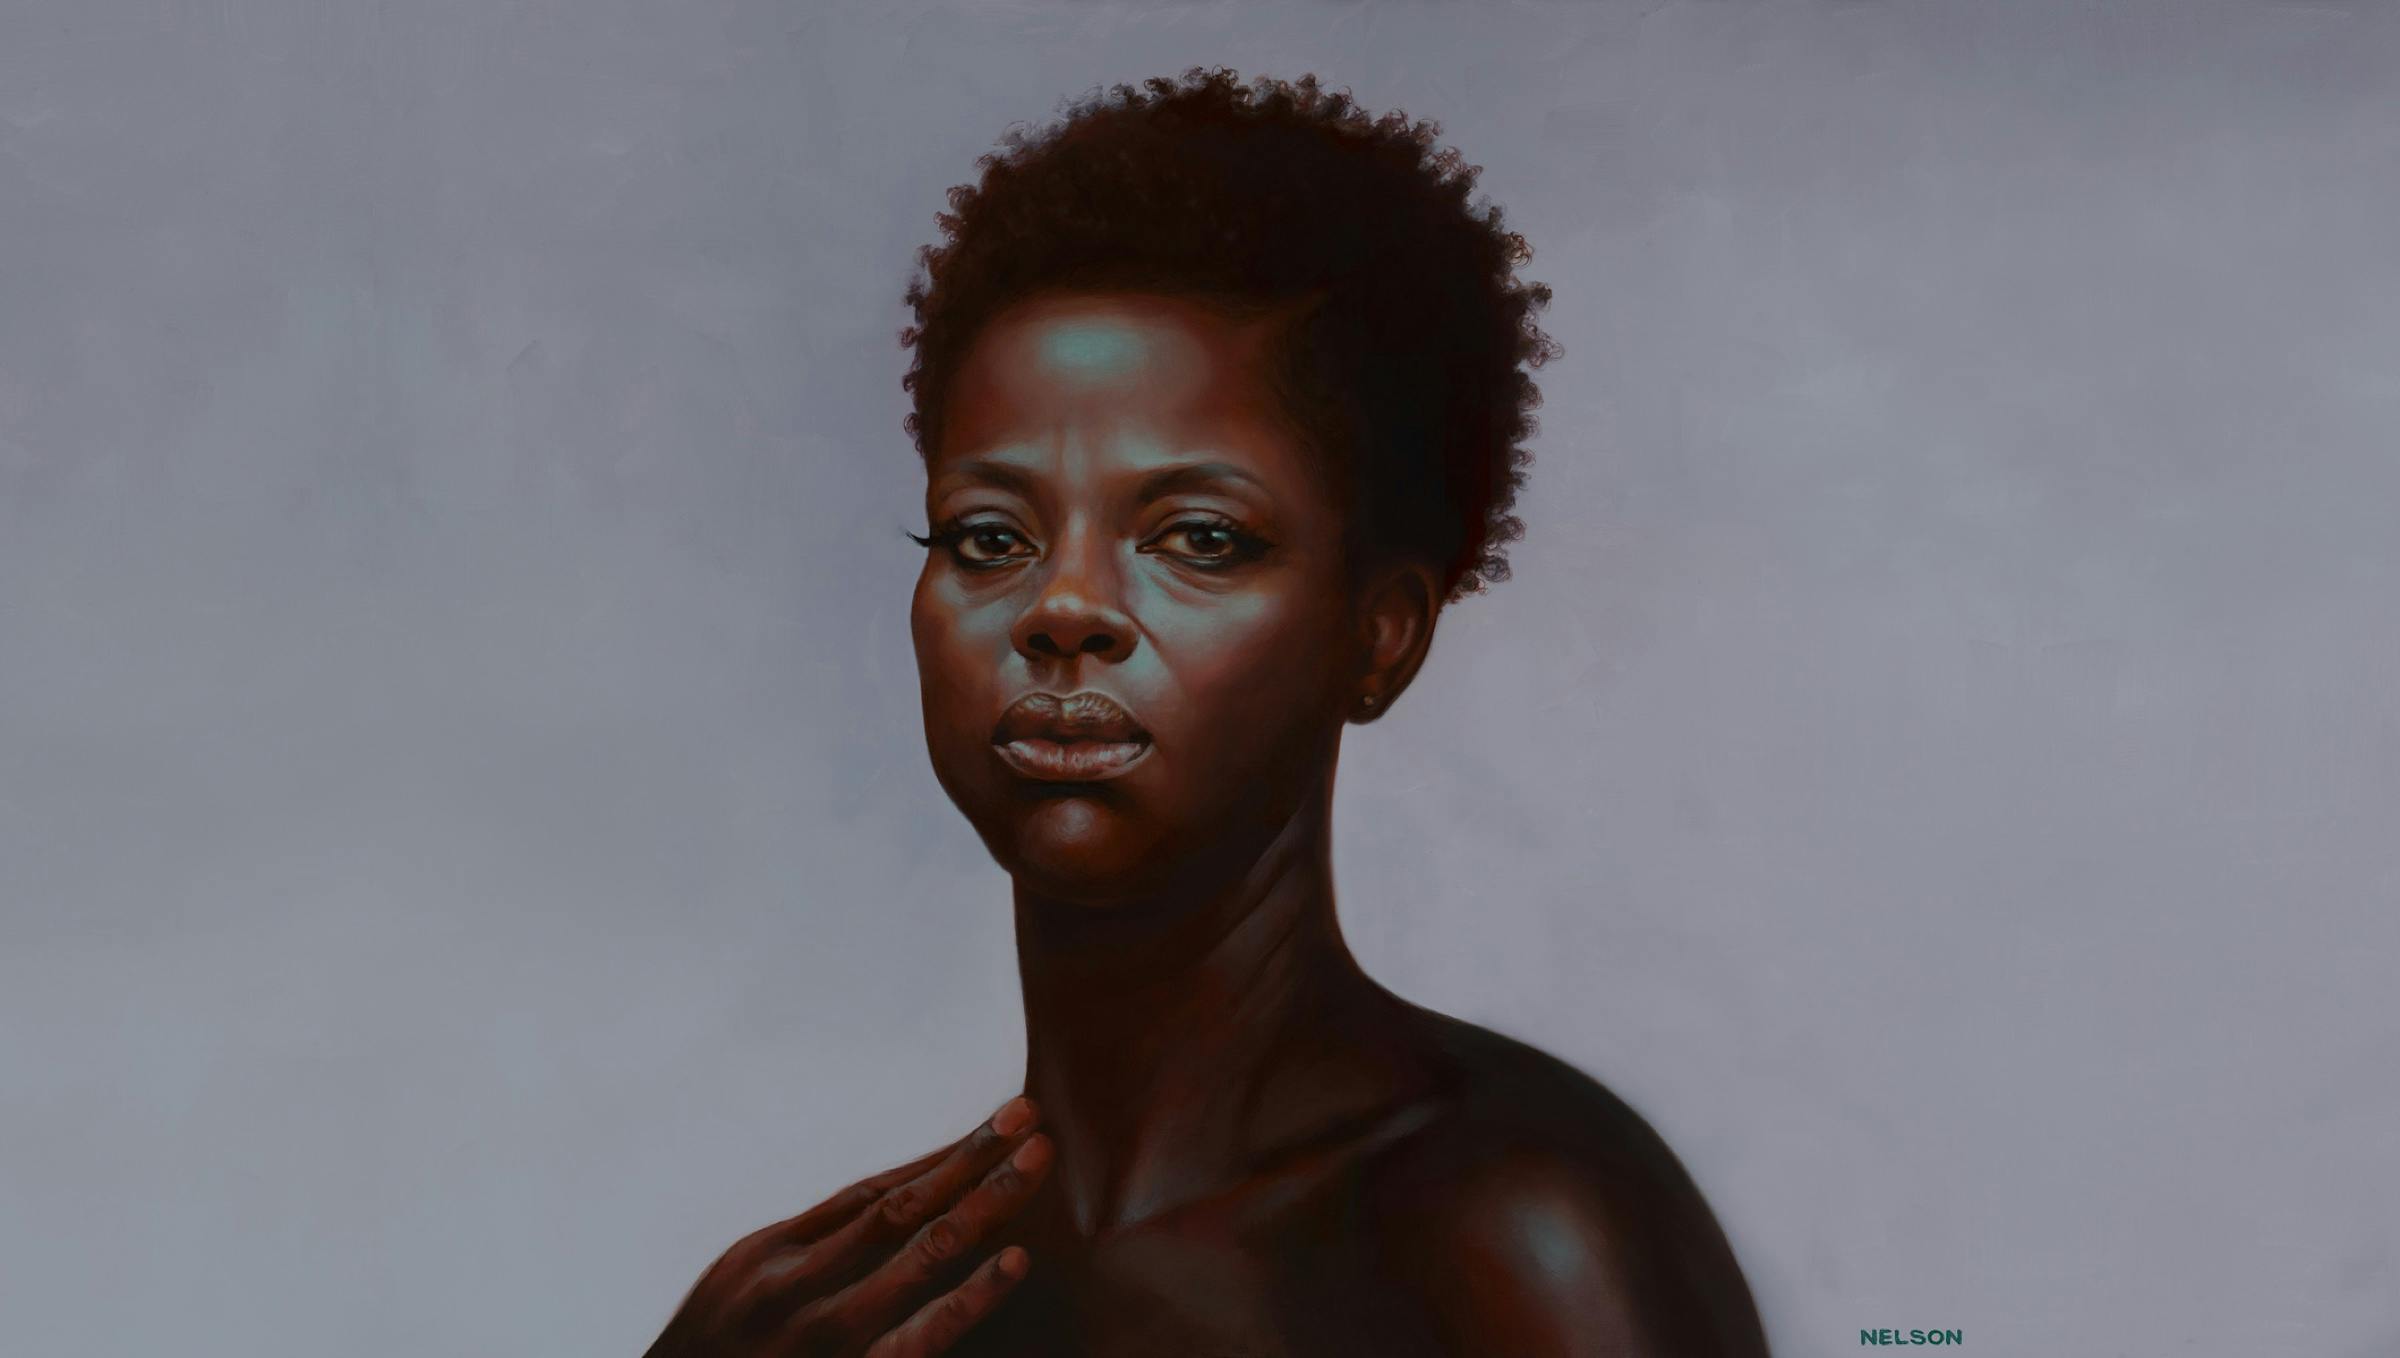 A painting of Viola Davis by Kadir Nelson. Davis looks straight ahead. She has bare shoulders and short hair. One hand is placed on her collarbone. She is pictured against a feathery background of soft pink, white, and blue brushstrokes. 